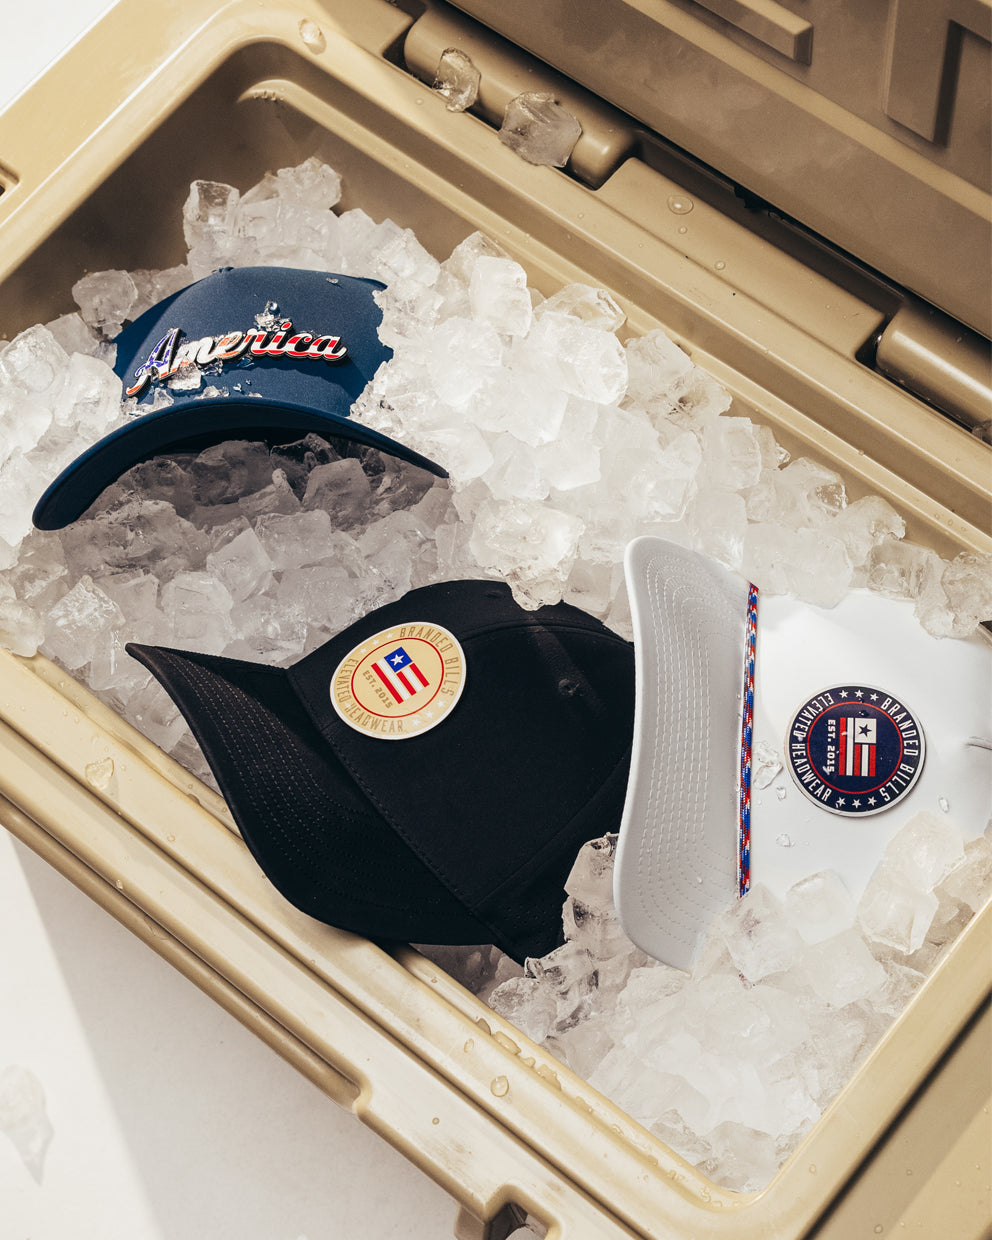 USA hats in a cooler of ice